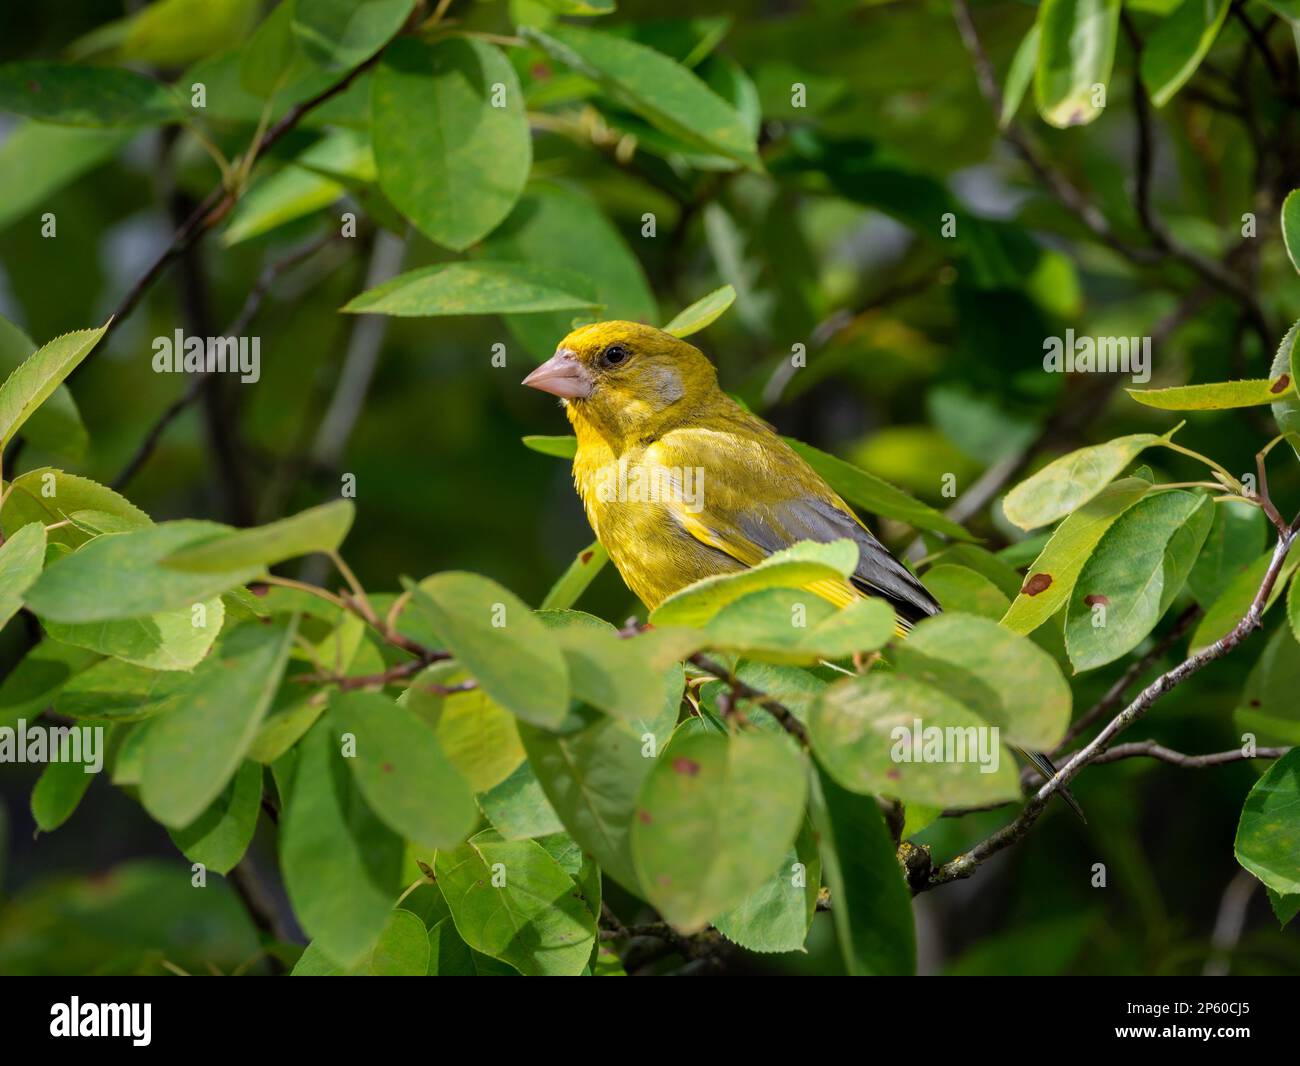 Greenfinch, Carduelis chloris, adult male perched on branch of Amelanchier lamarckii tree, Netherlands Stock Photo